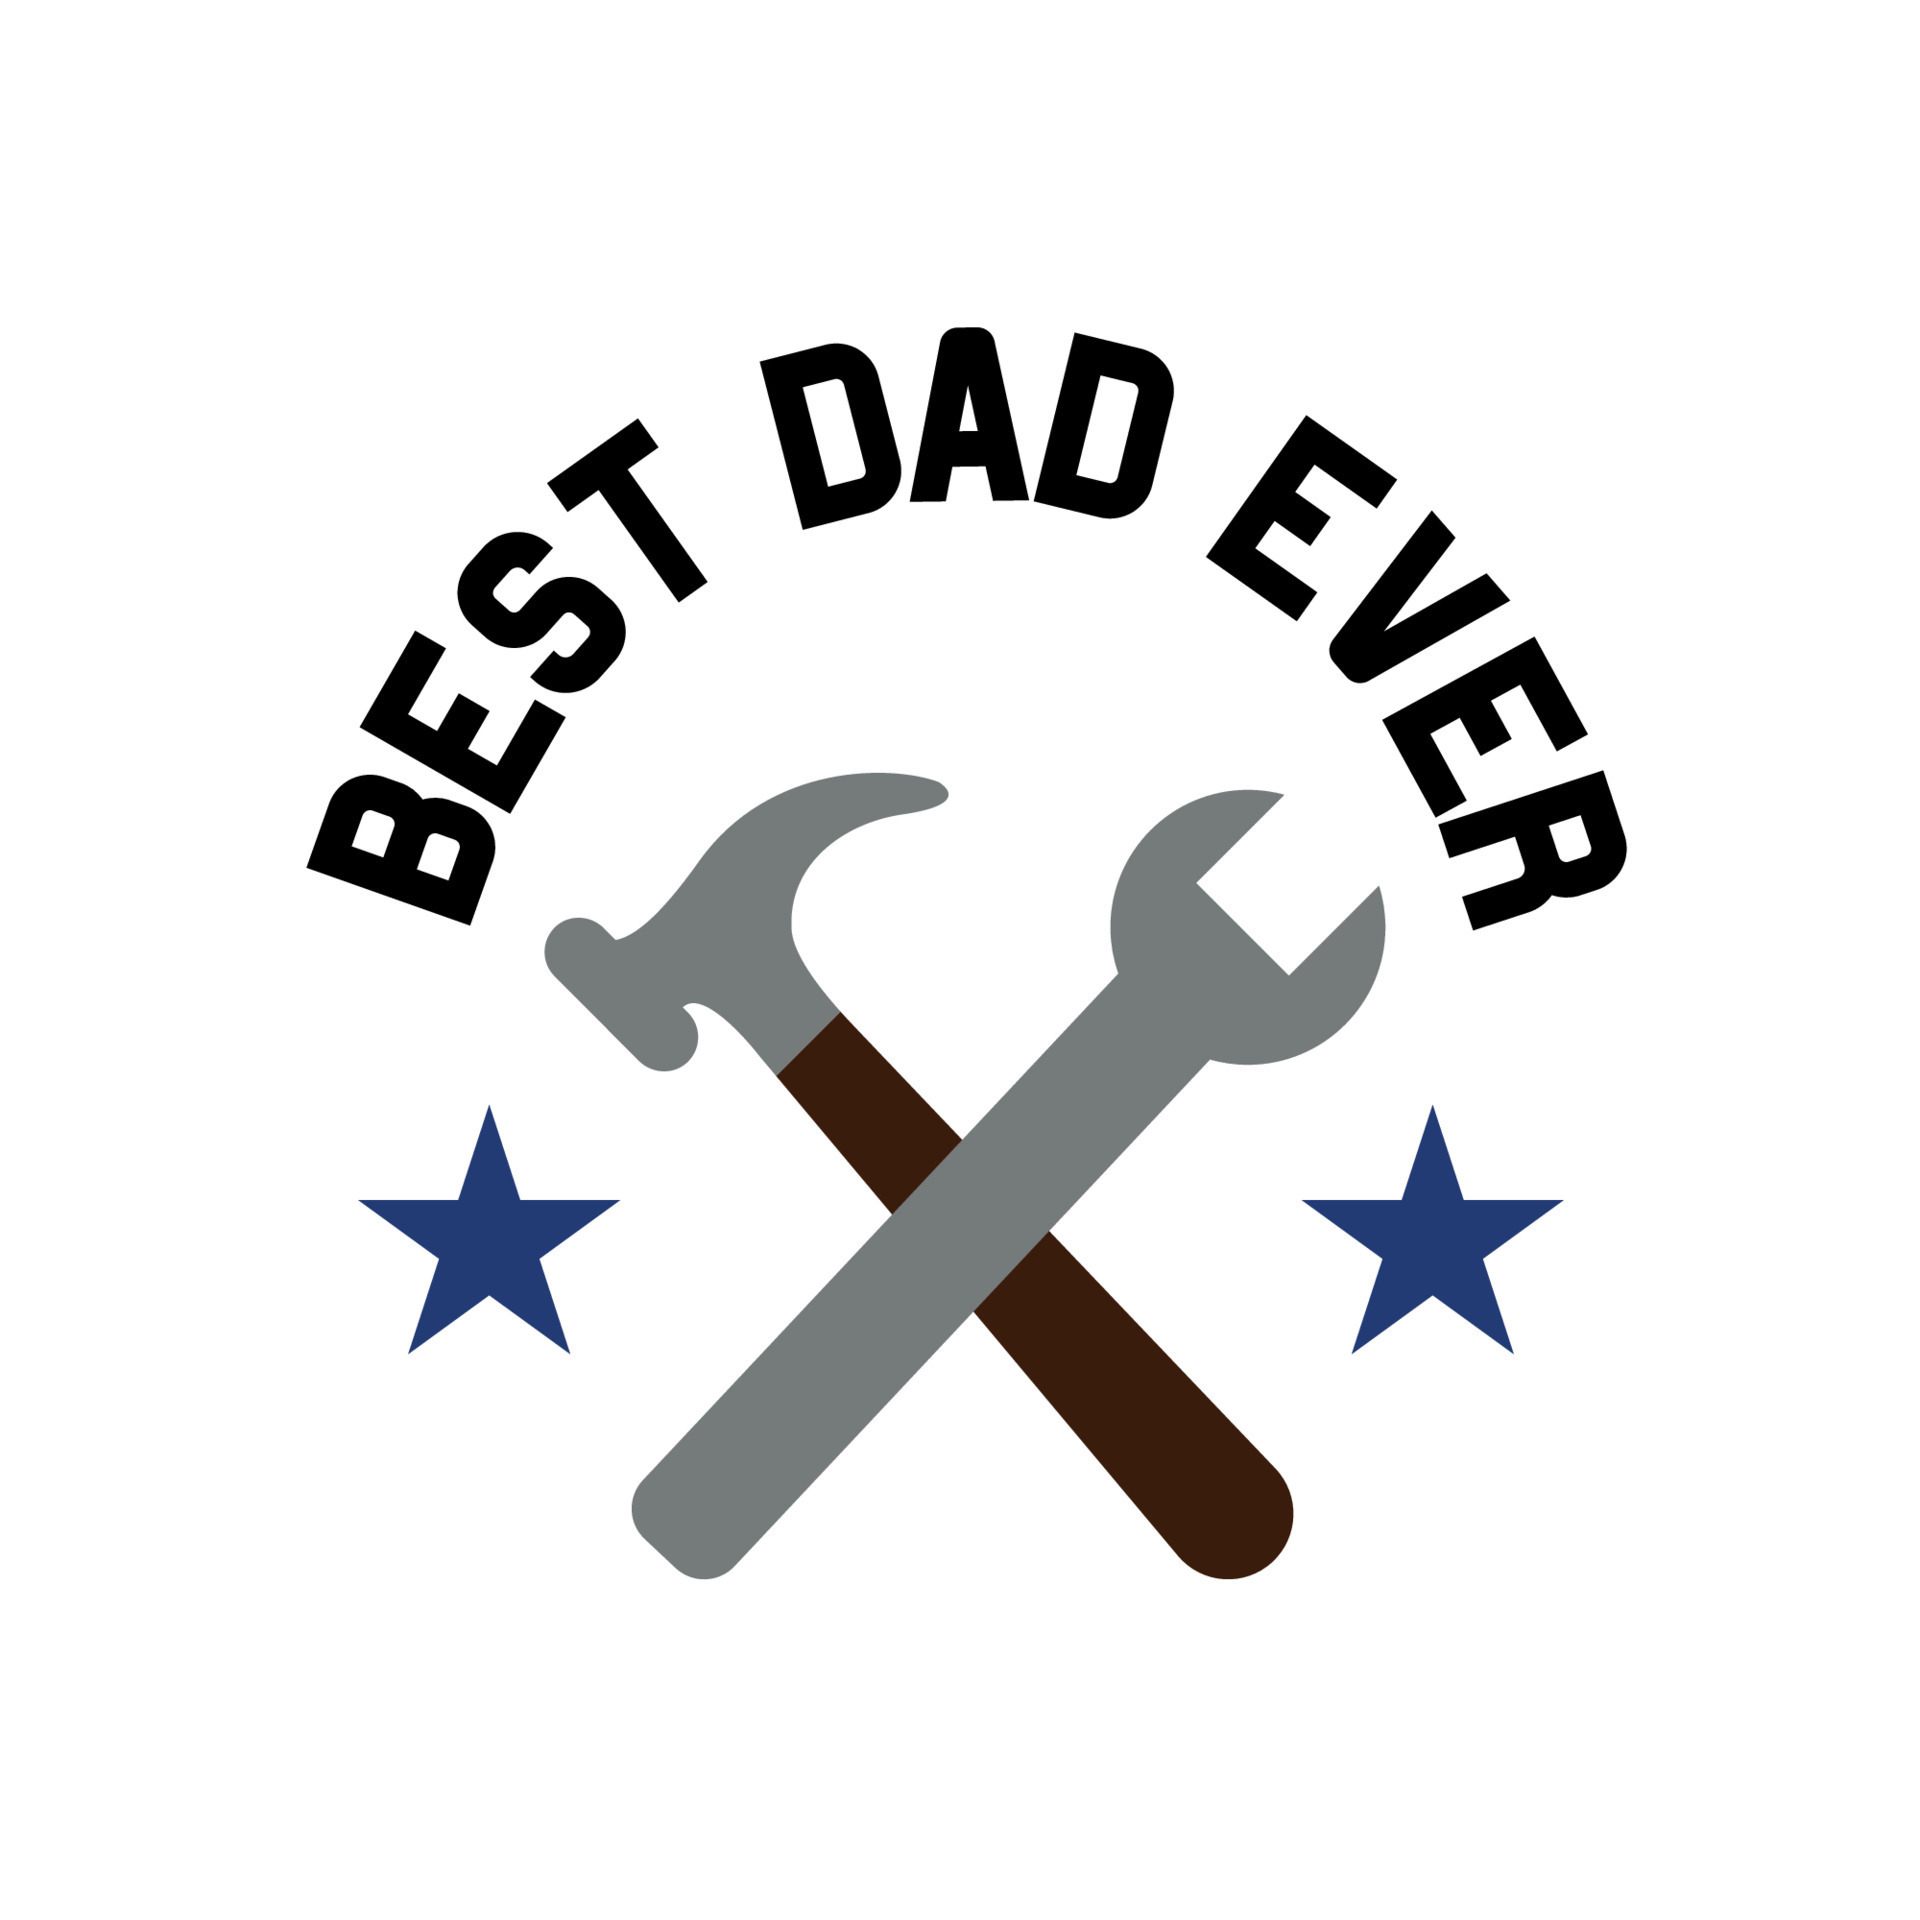 https://static.vecteezy.com/system/resources/previews/011/321/168/original/best-dad-ever-master-text-fishing-rod-sign-retro-style-illustration-flat-style-medal-emblem-award-simple-logo-vector.jpg